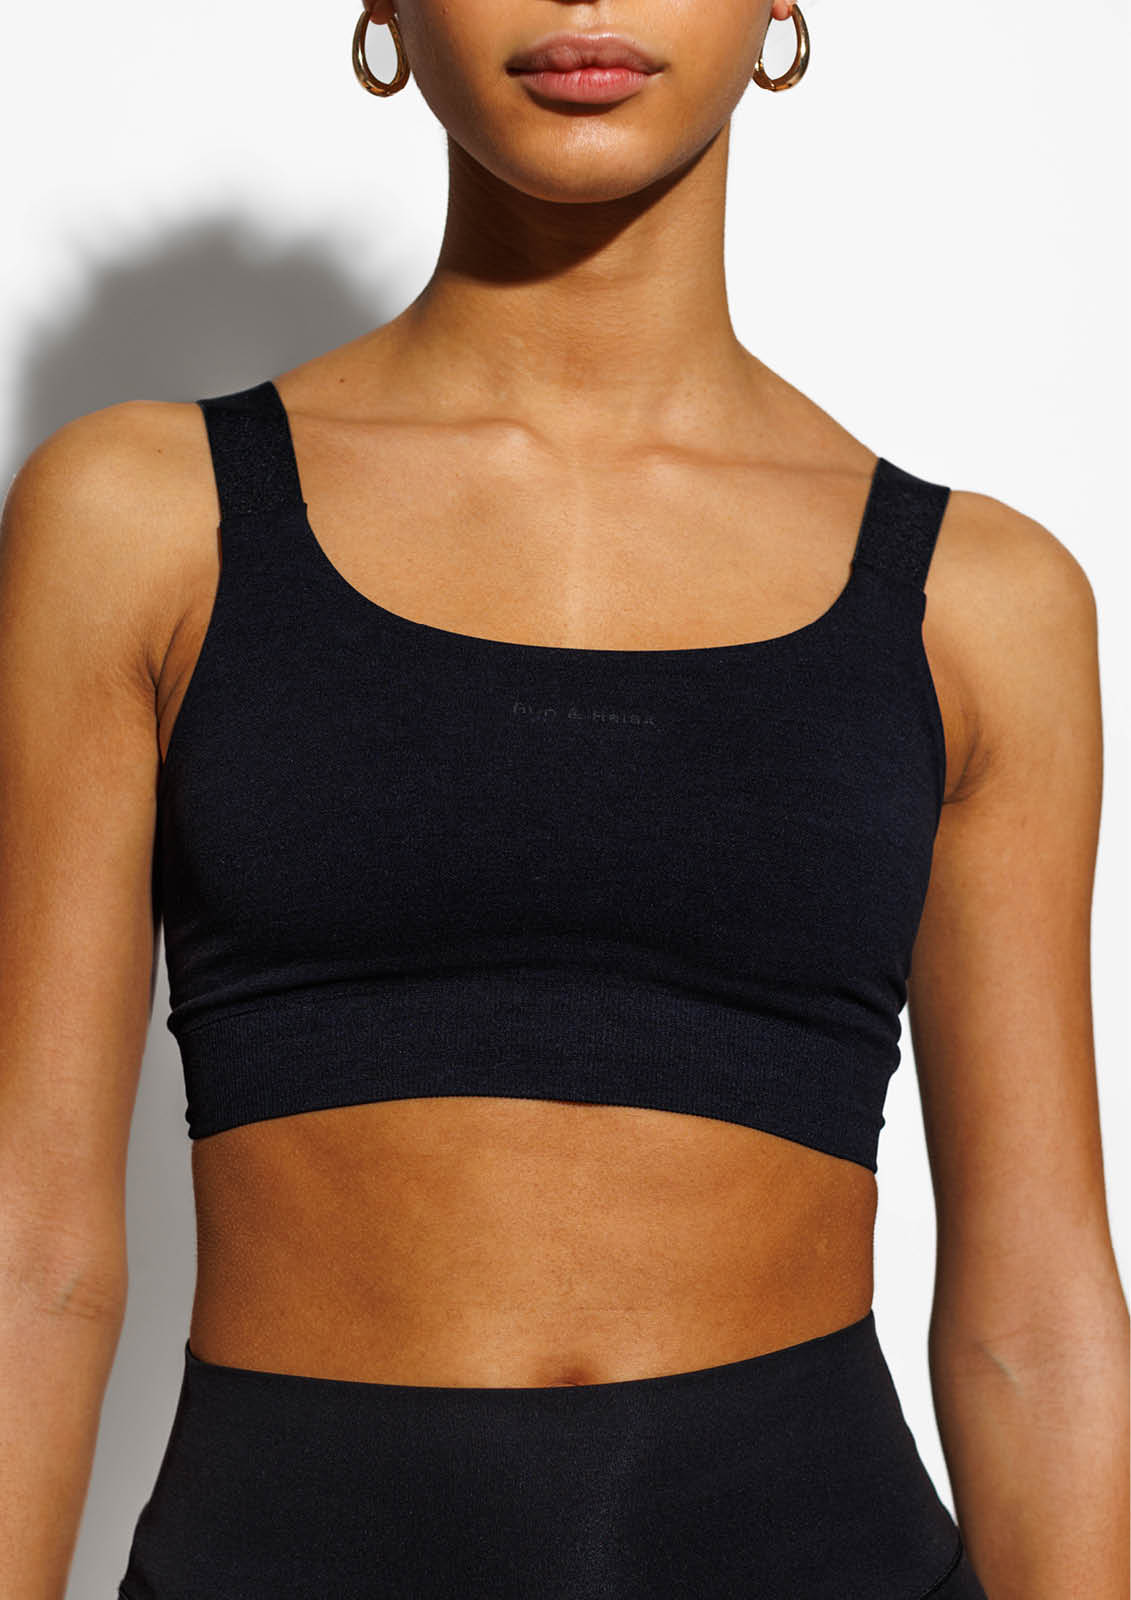 Seamless Yoga Athletic Bras With High Impact Padding For Women Perfect For  Running, Gym, Fitness And Workouts From Baiqiliu, $27.96